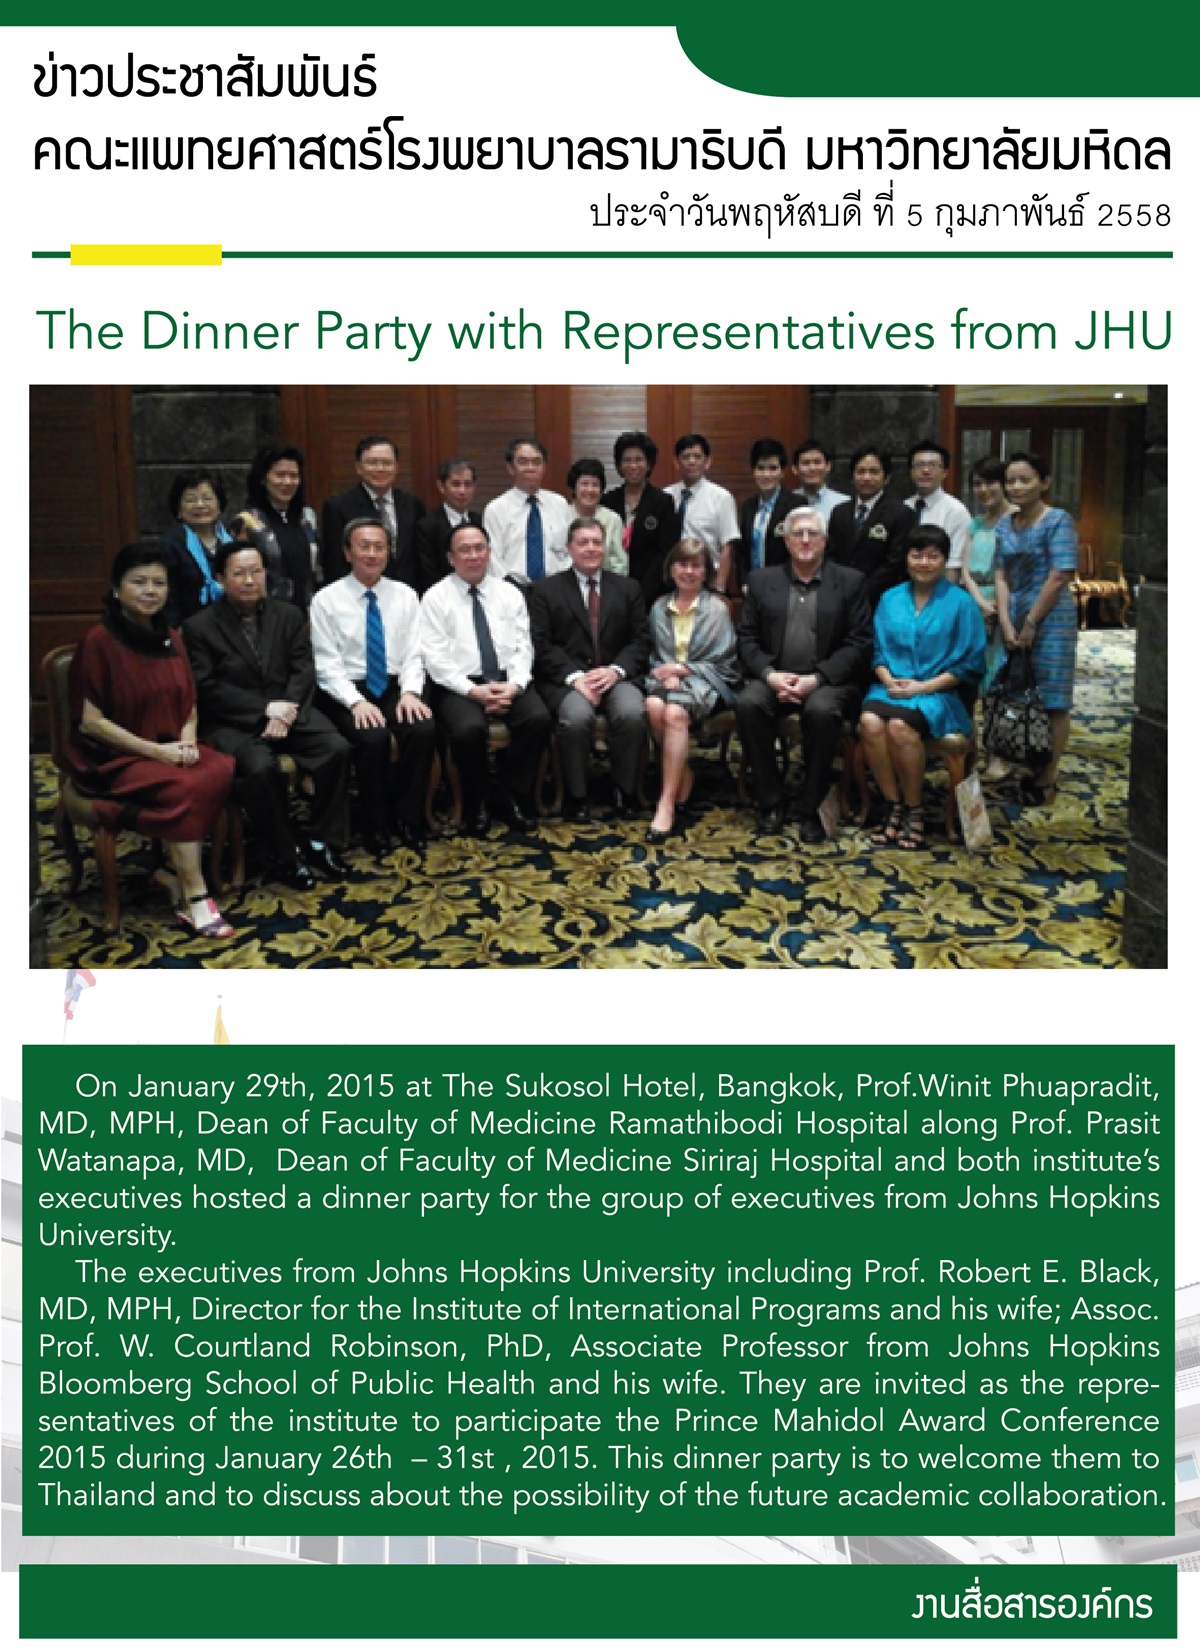 The Dinner Party with Representatives from JHU